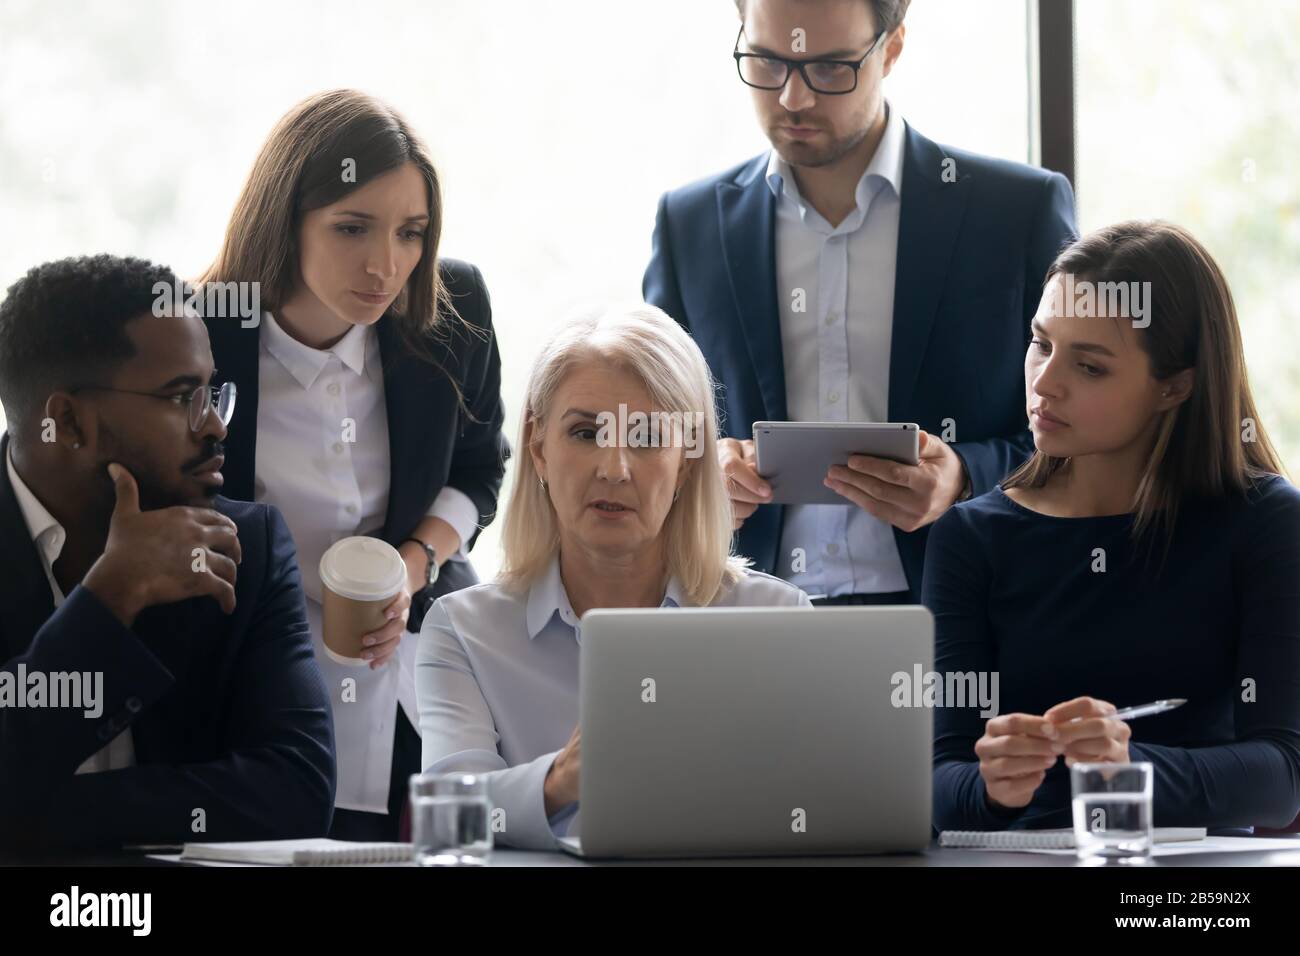 Diverse businesspeople brainstorm work together at laptop Stock Photo